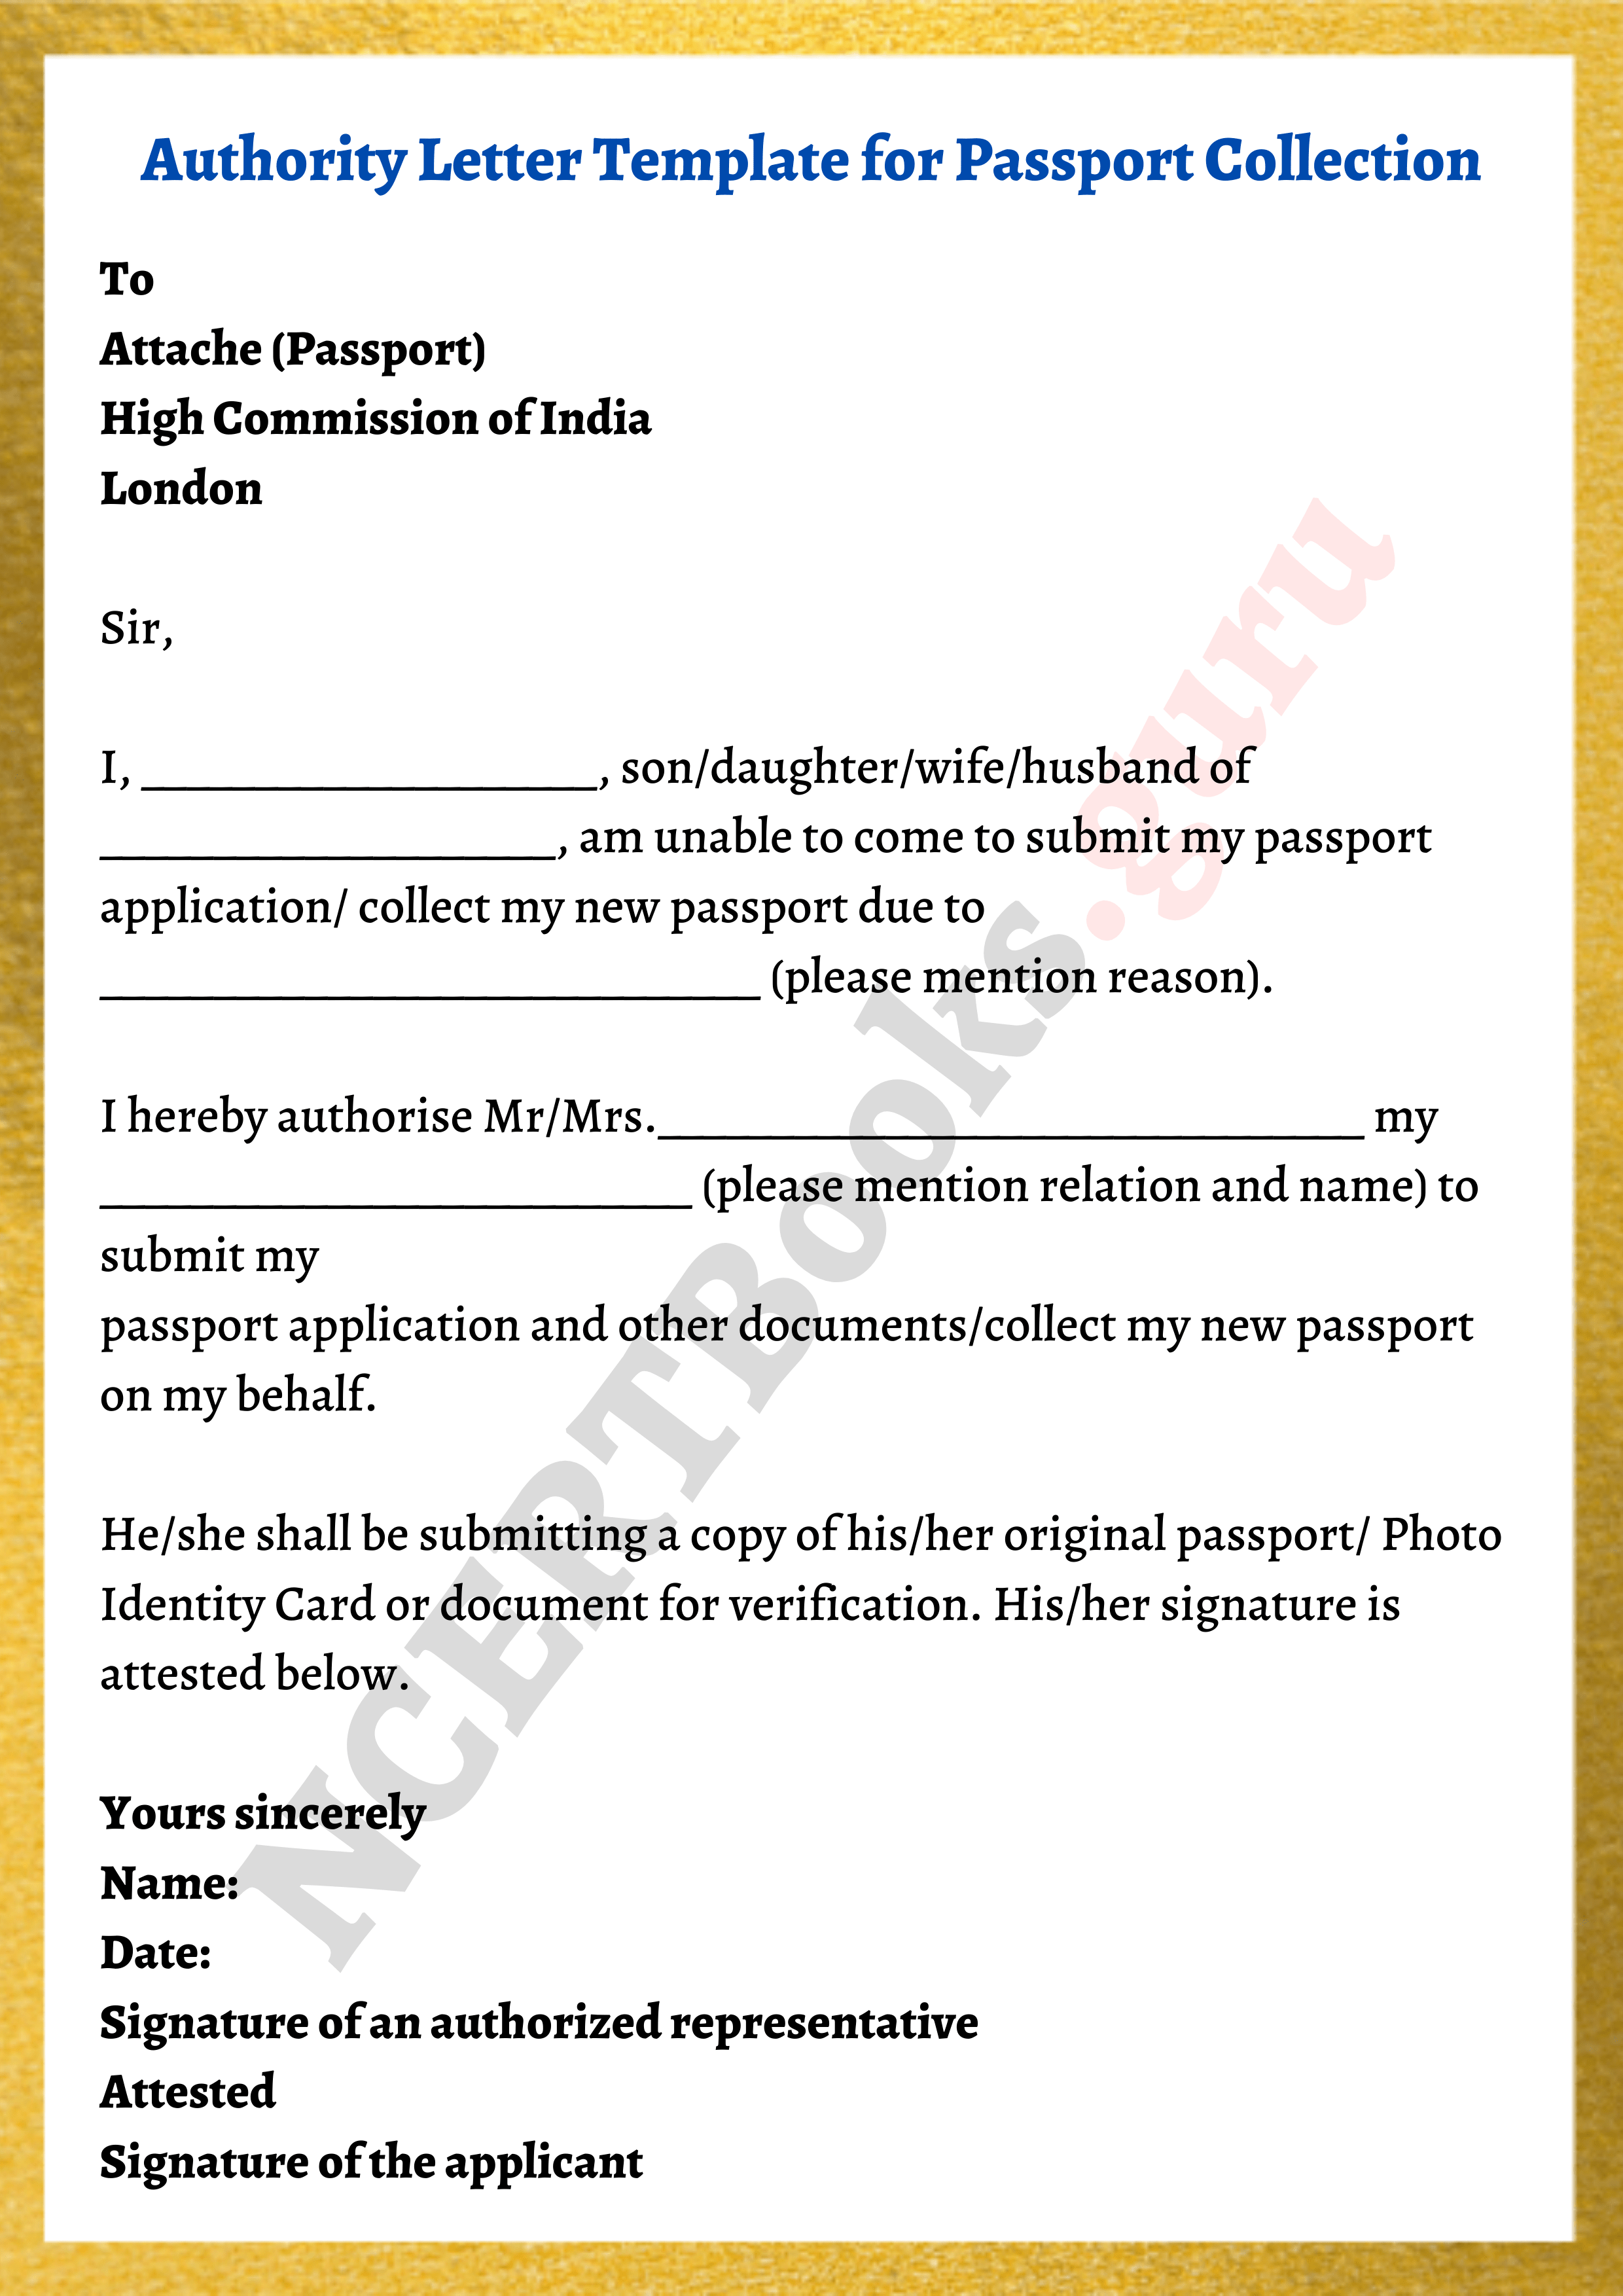 template of authority letter